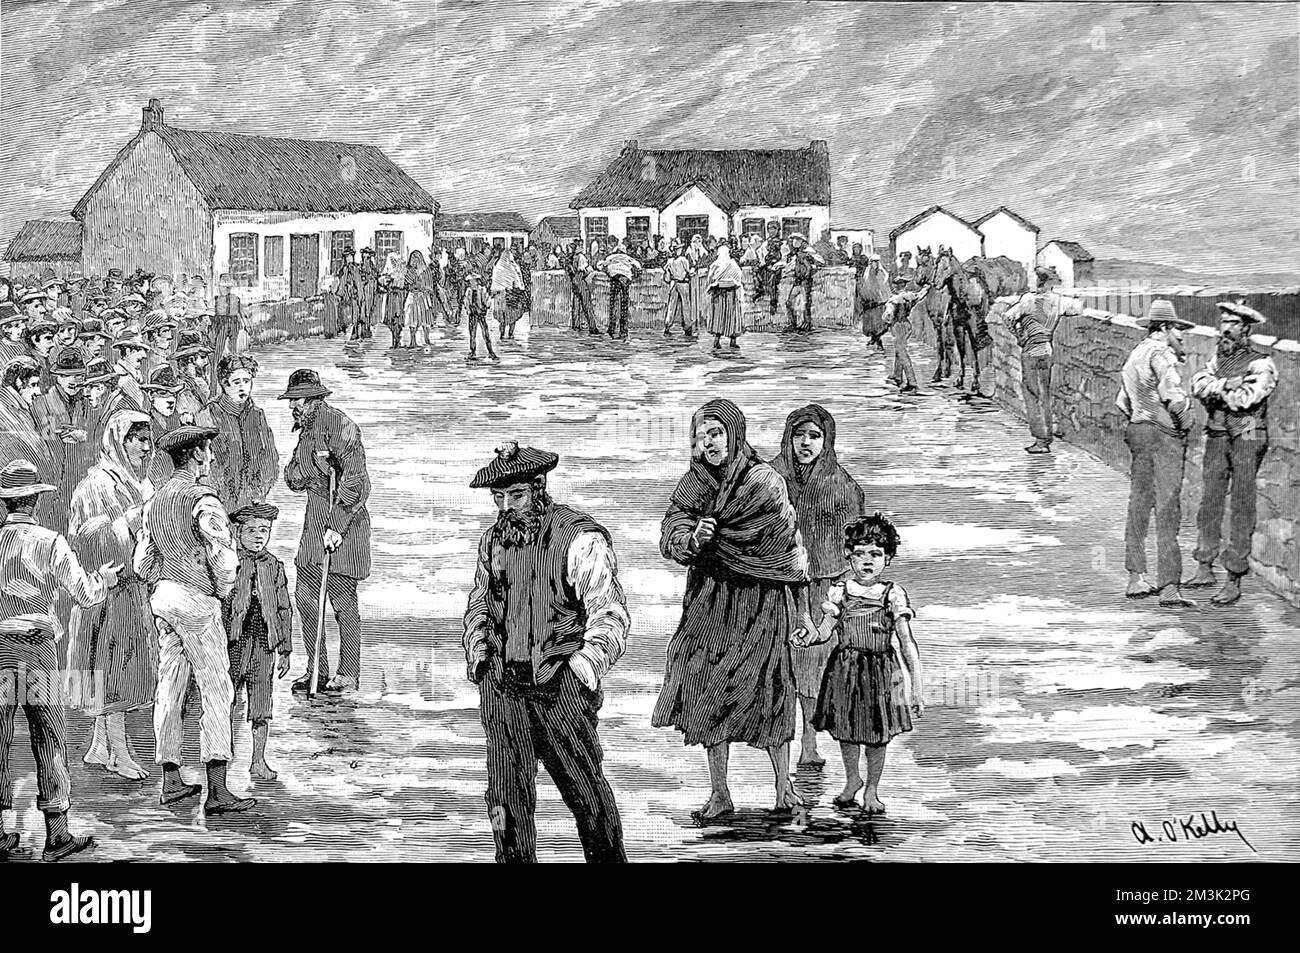 A crowd of men and women wait for relief outside the priest's house at Kilronan, Arran Islands, Ireland. Hunger and destitution were brought on by the potato famine in the mid 19th century and further compounded by the forced evictions of poverty-stricken peasants from their homes and farms.  1886 Stock Photo